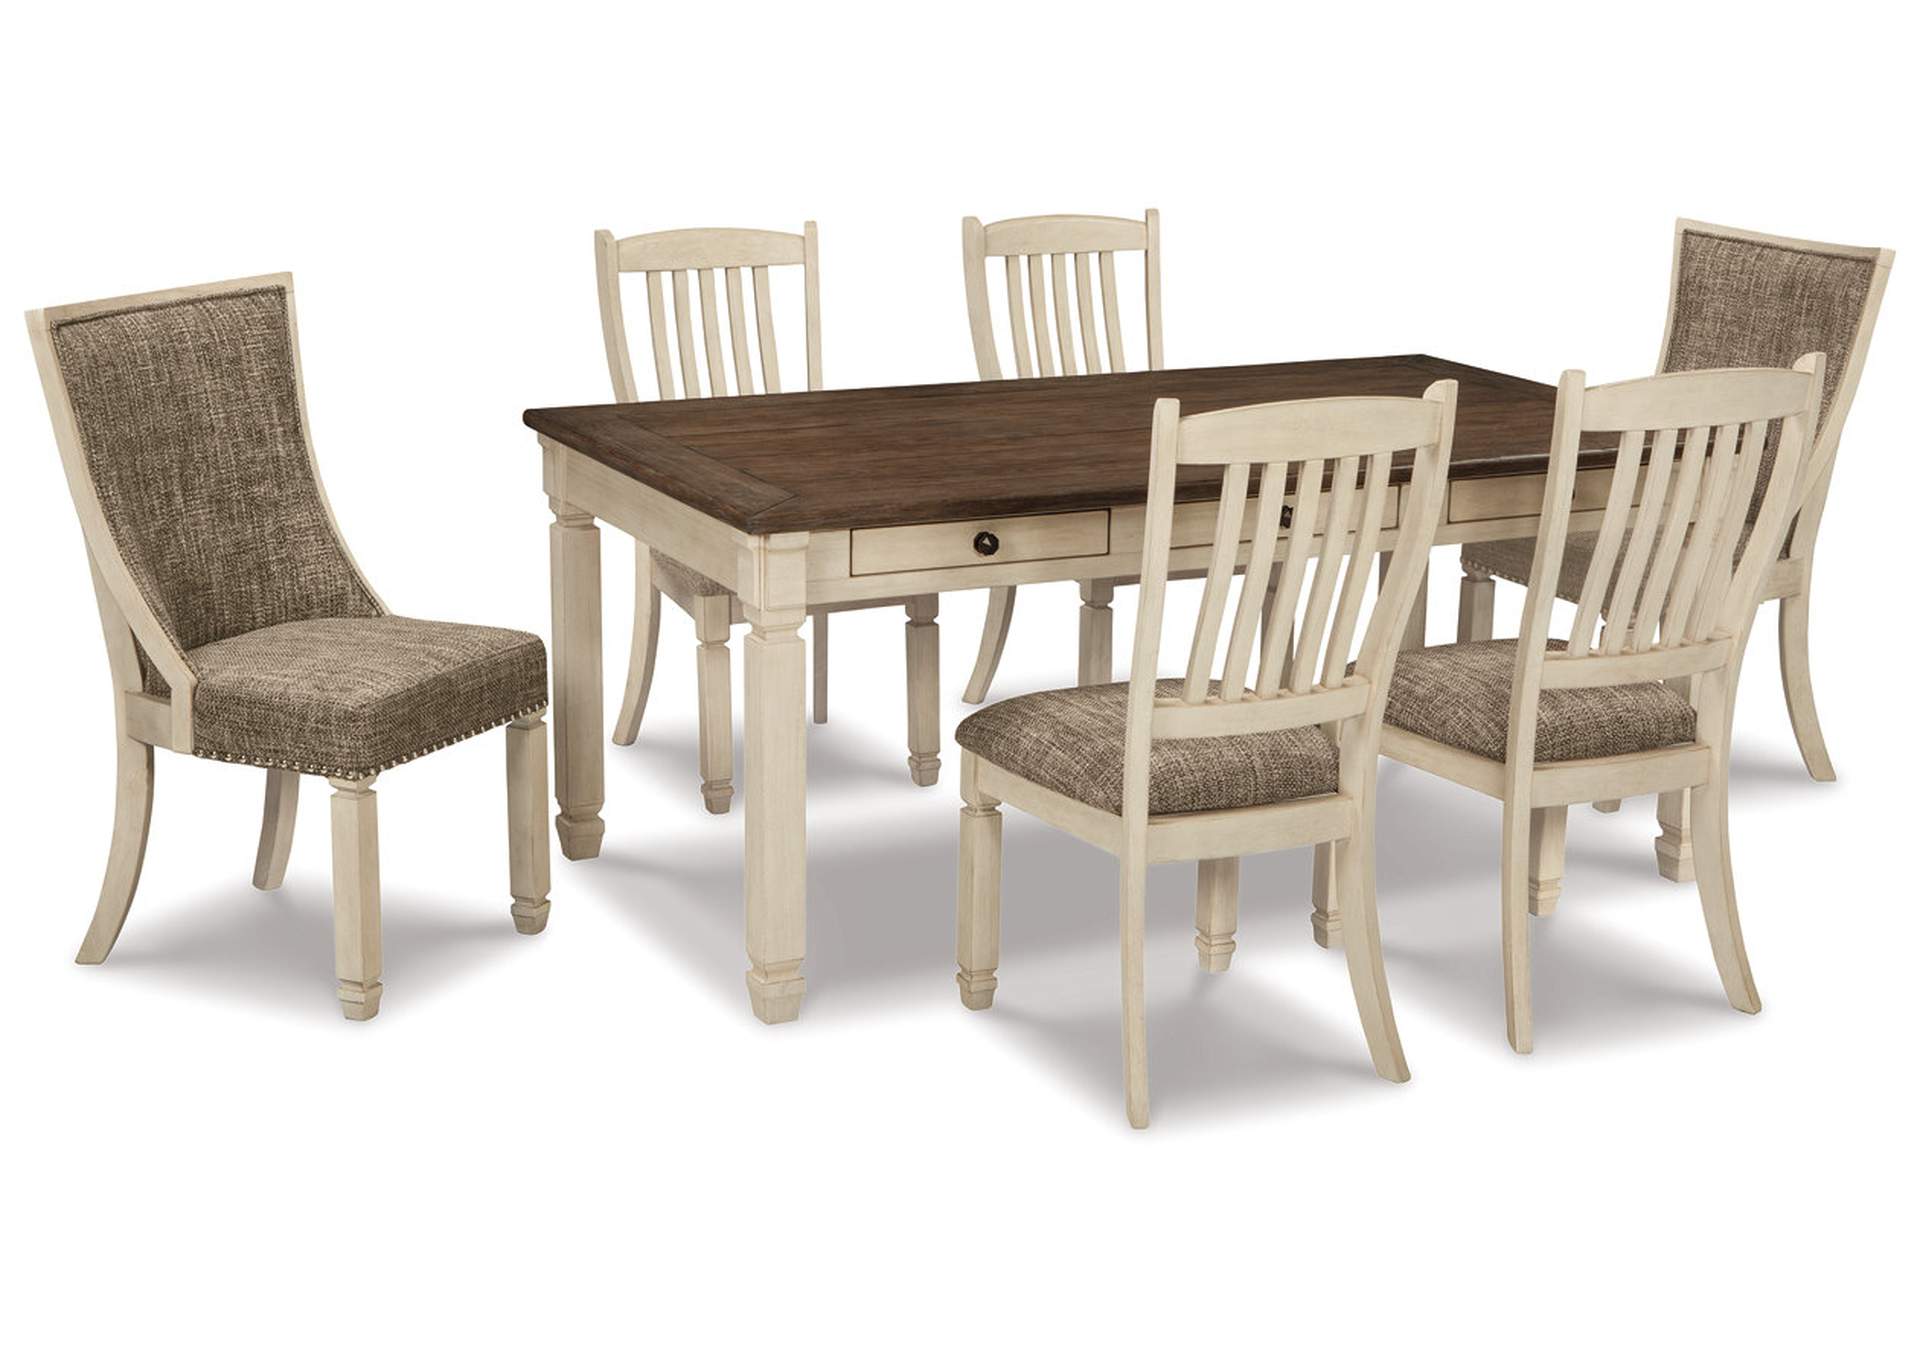 Bolanburg Dining Table and 6 Chairs,Signature Design By Ashley